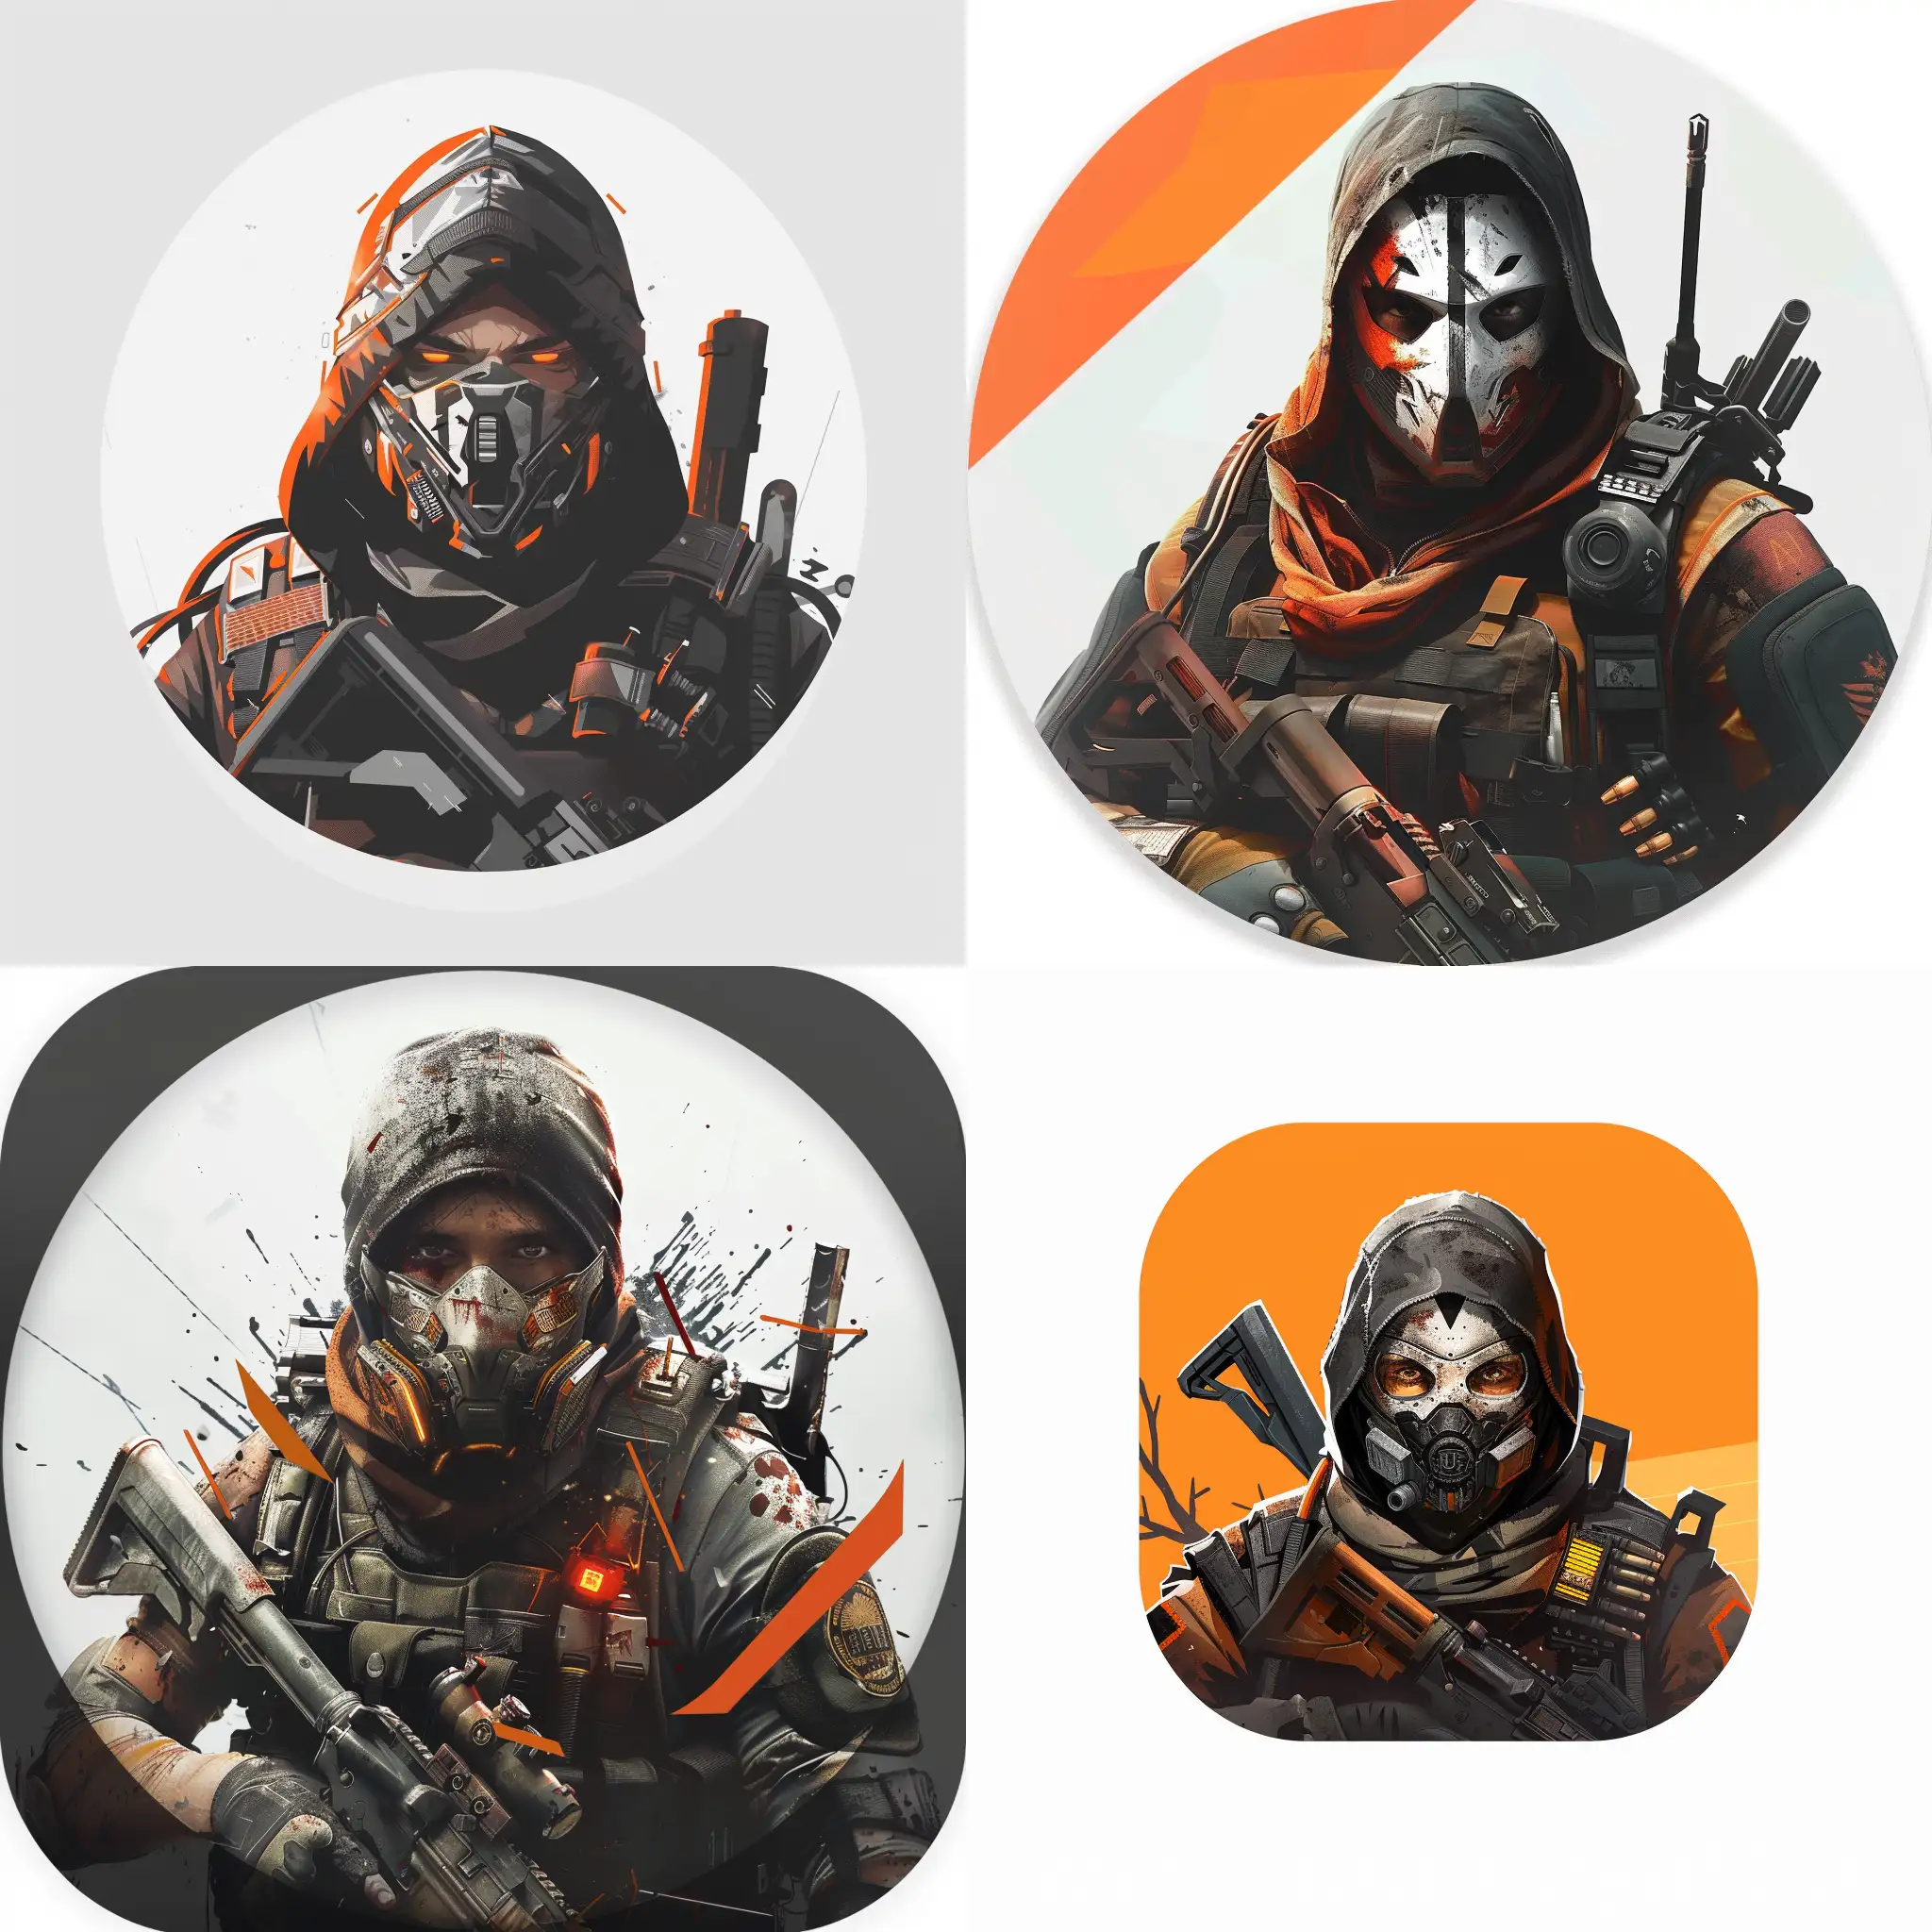  !A square gamer profile picture logo suitable for use on Steam and Ubisoft platforms. The logo should feature the character ‘Recruiter’ from The Division 2 game, centered in the image. The character should be depicted wearing a hunter mask and holding a weapon. Ensure that the background is minimalistic, with the focus solely on the character. Please make the image high-resolution and suitable for both square and circular display formats.